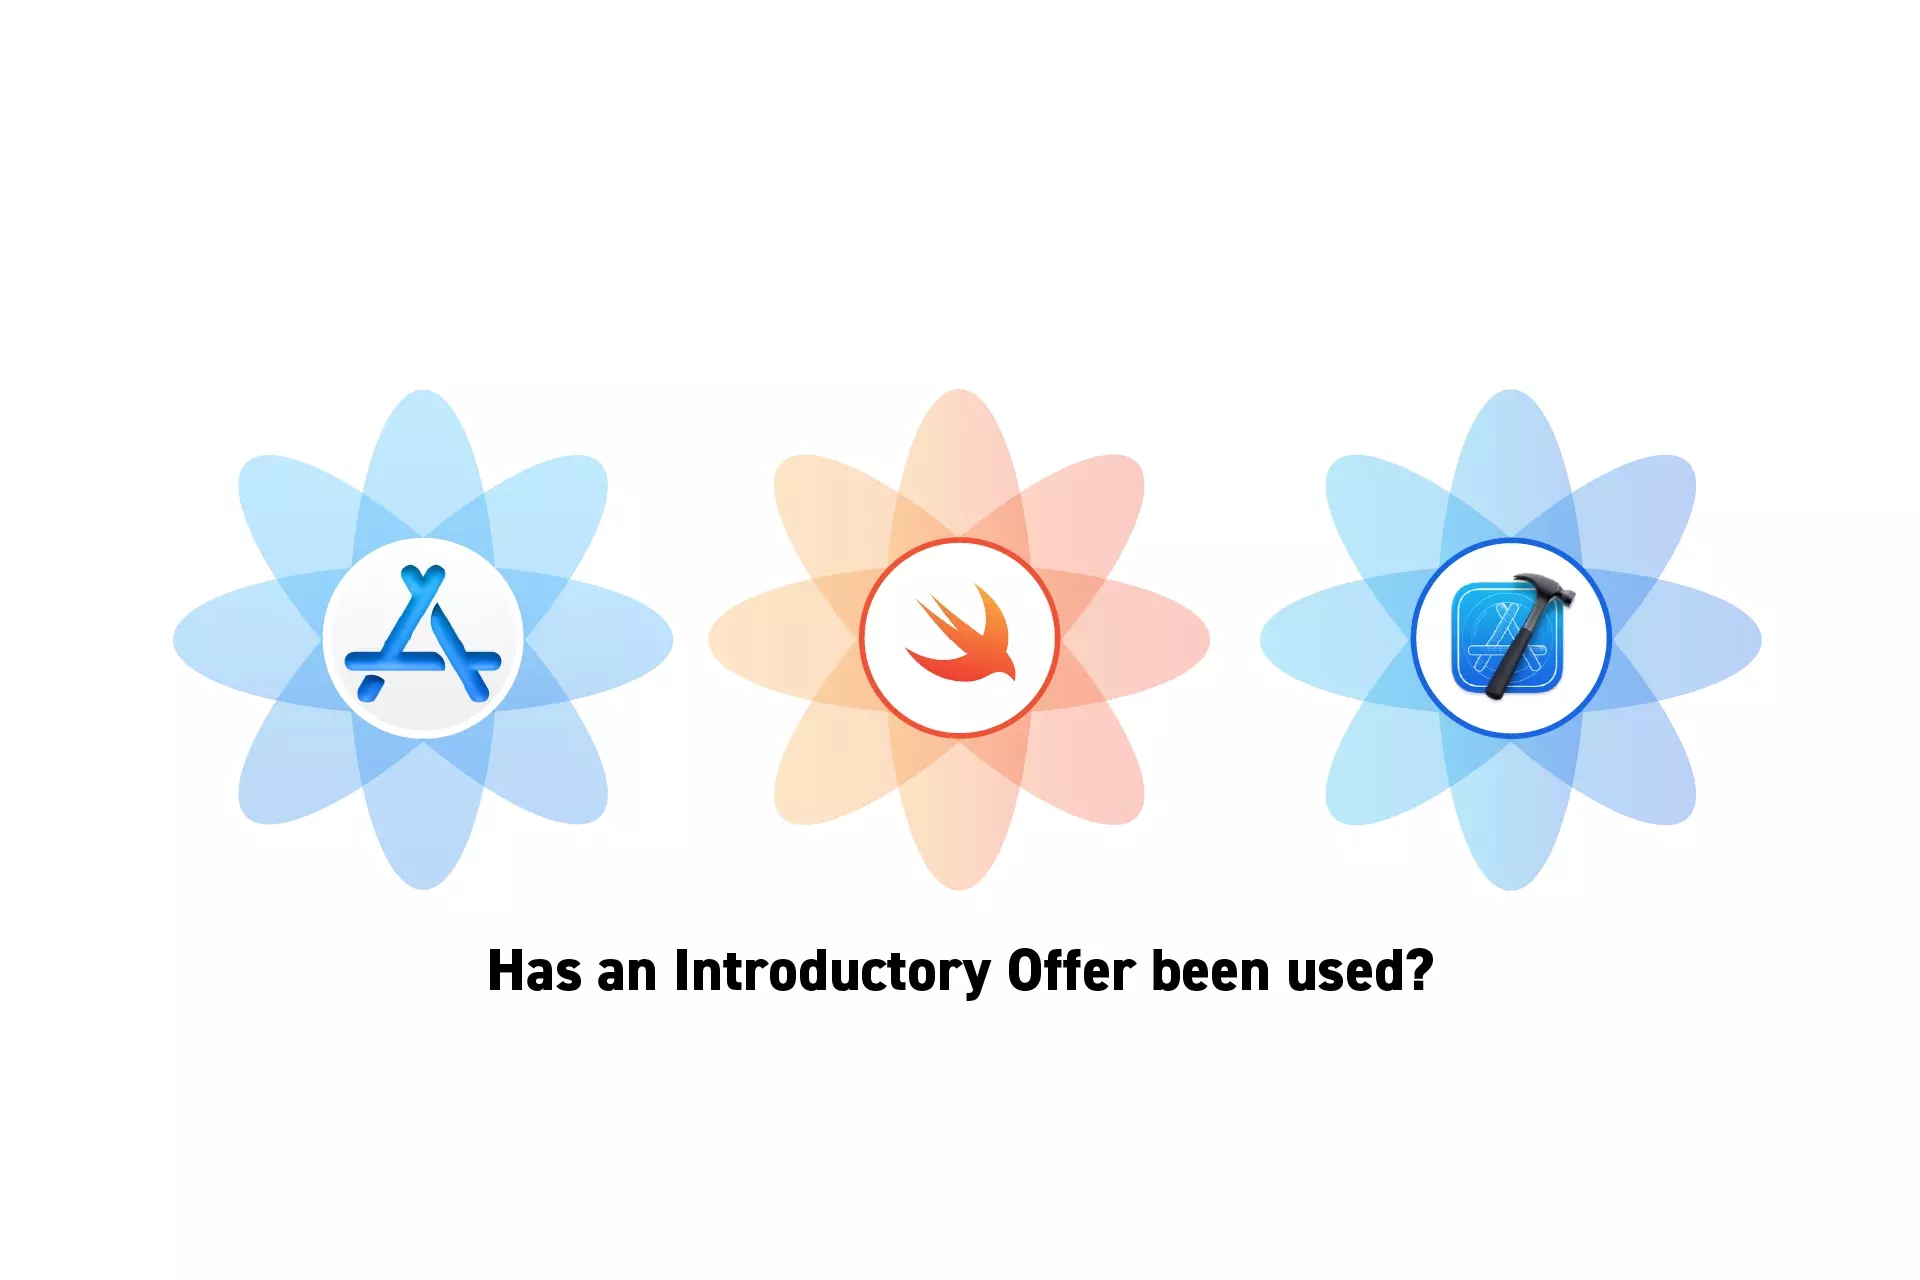 Three flowers that represent StoreKit, Swift and XCode side by side. Beneath them sits the text “Has an Introductory Offer been used?”